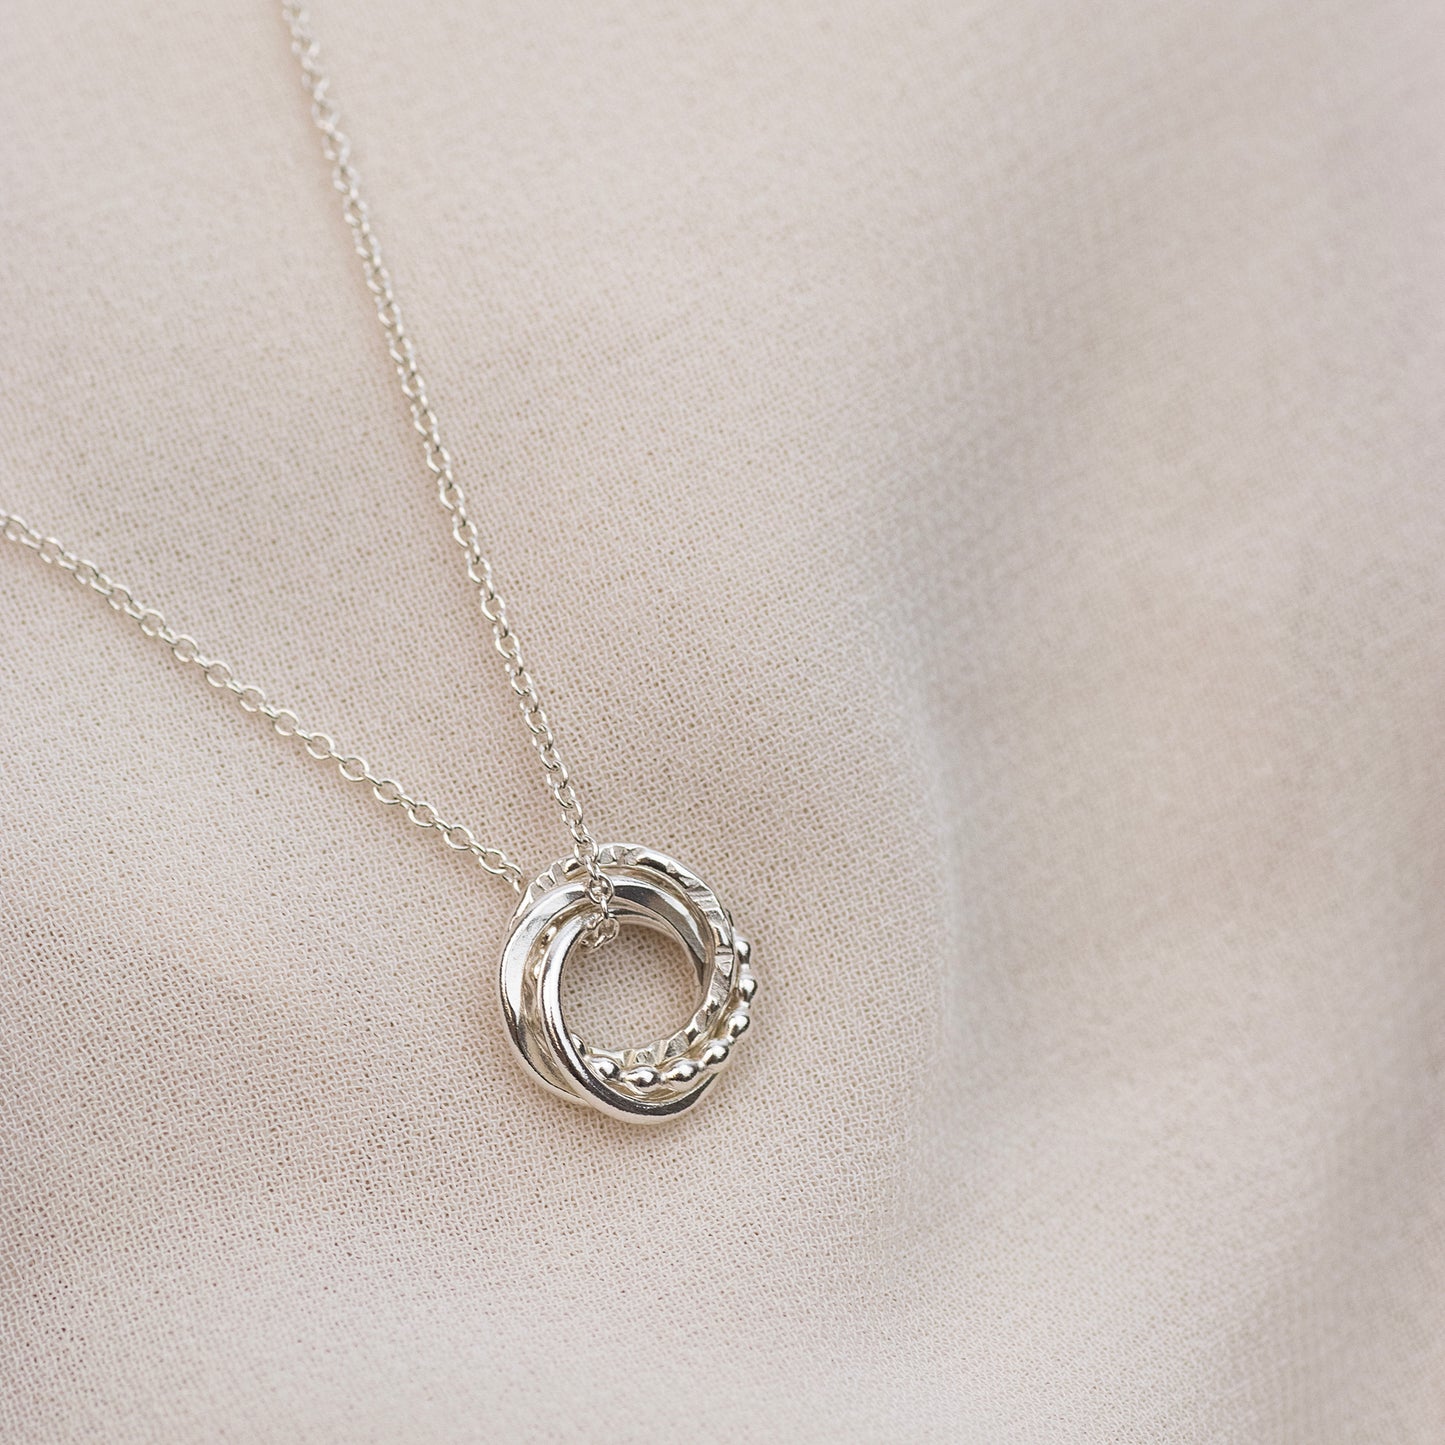 4 Friends Necklace - Silver Love Knot 